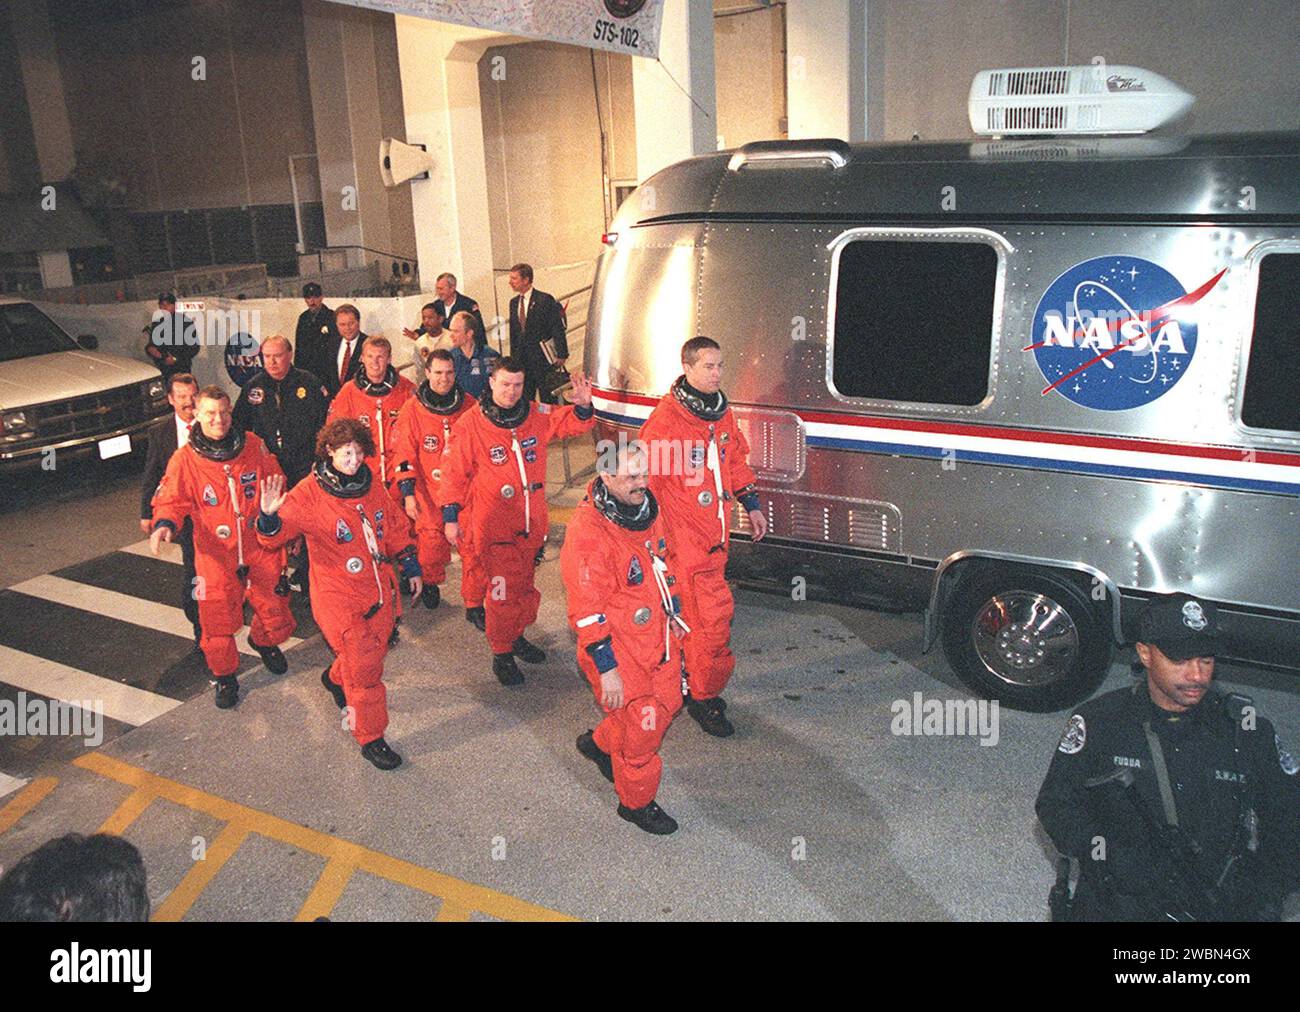 The STS-102 crew heads for the Astrovan after leaving the Operations and Checkout Building behind them. In front, left to right, are Mission Specialists James Voss, Susan Helms and Yury Usachev. In back, left to right, are Mission Specialists Andrew Thomas and Paul Richards, Pilot James Kelly and Commander James Wetherbee. STS-102 is the eighth construction flight to the Space Station, carrying the Multi-Purpose Logistics Module Leonardo. The primary delivery system used to resupply and return Station cargo requiring a pressurized environment, Leonardo will deliver up to 10 tons of laboratory Stock Photo